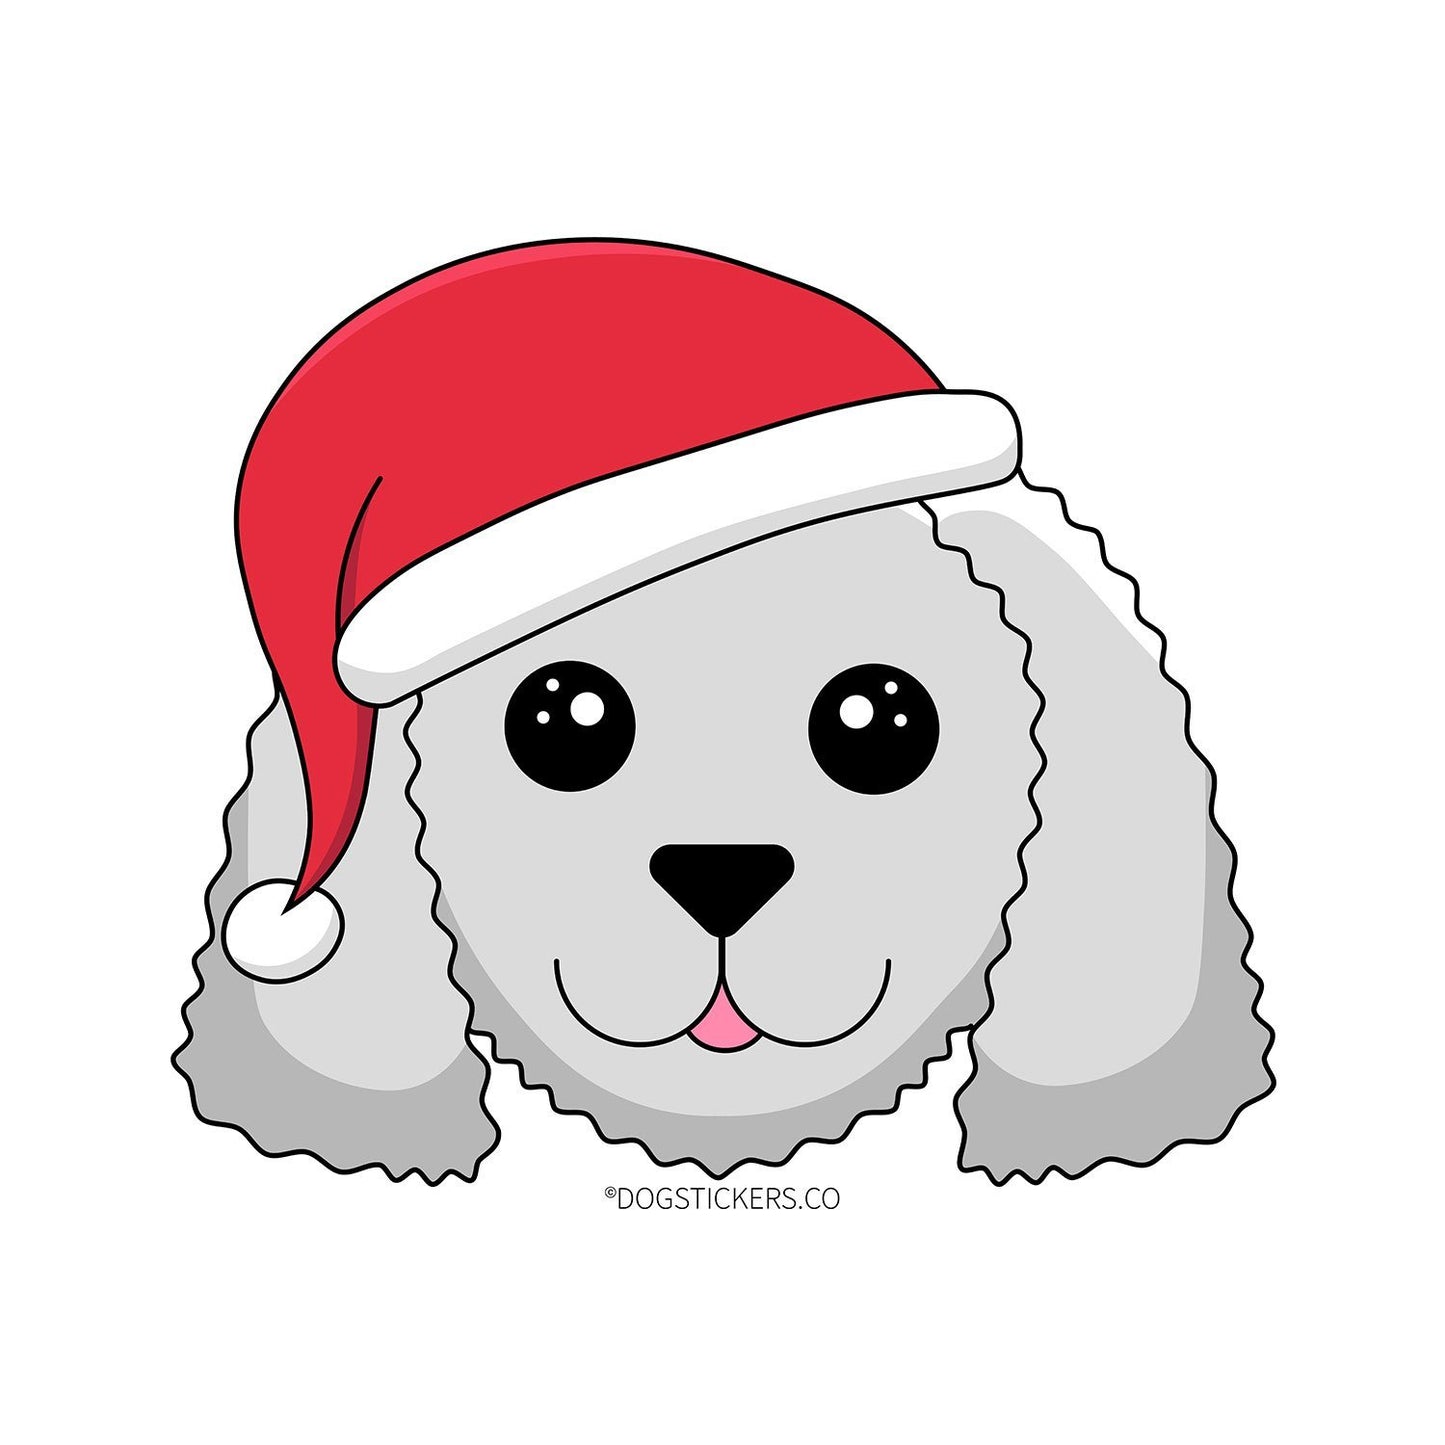 Poodle Sticker - Christmas Santa Hat - Dogstickers.co